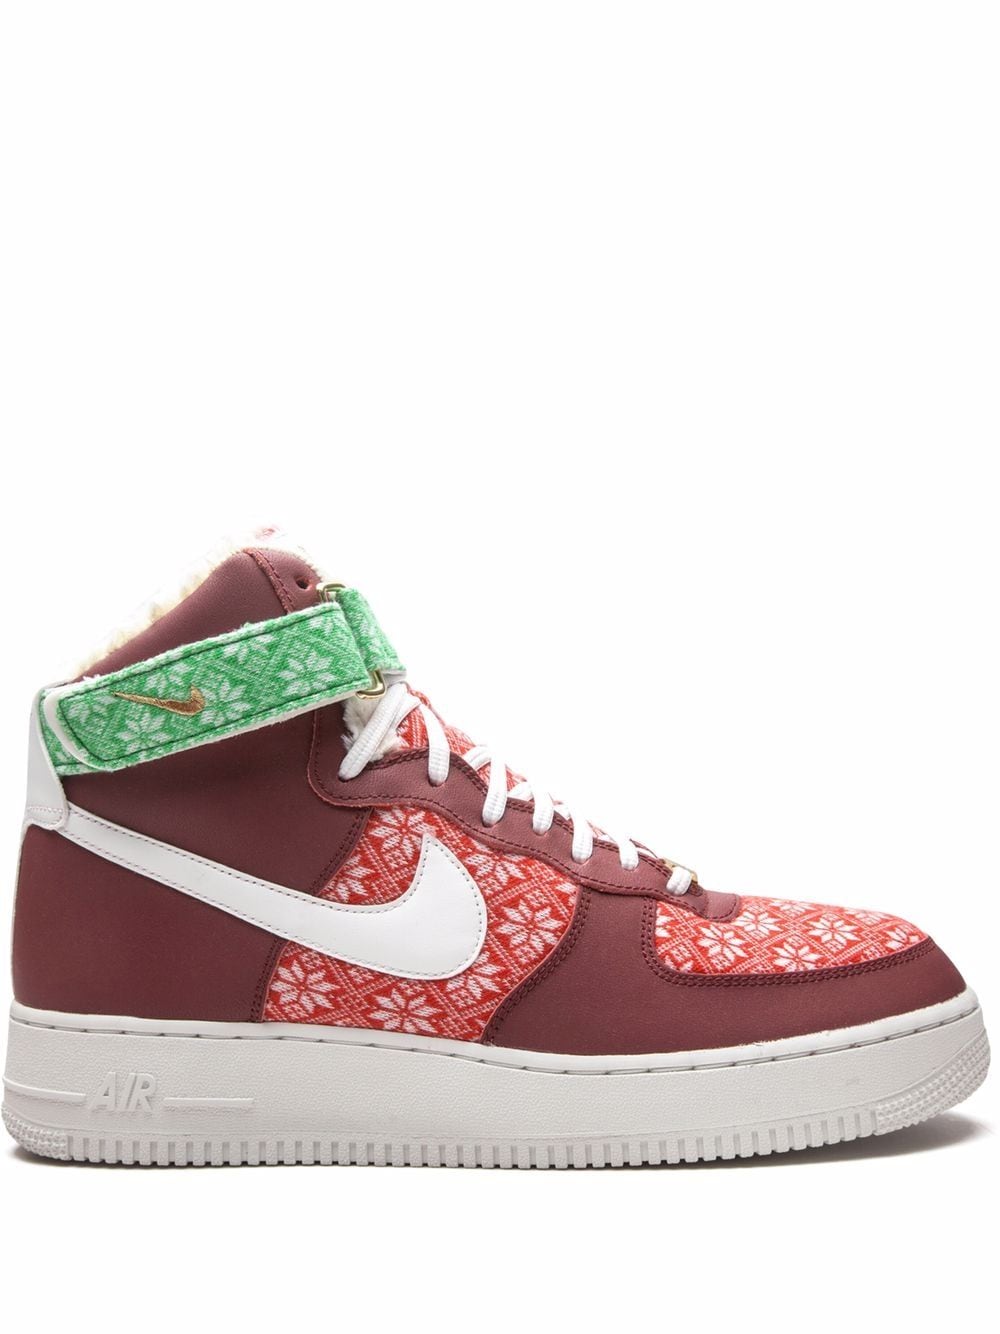 Nike Air Force 1 High "Nordic Christmas" sneakers - Red von Nike